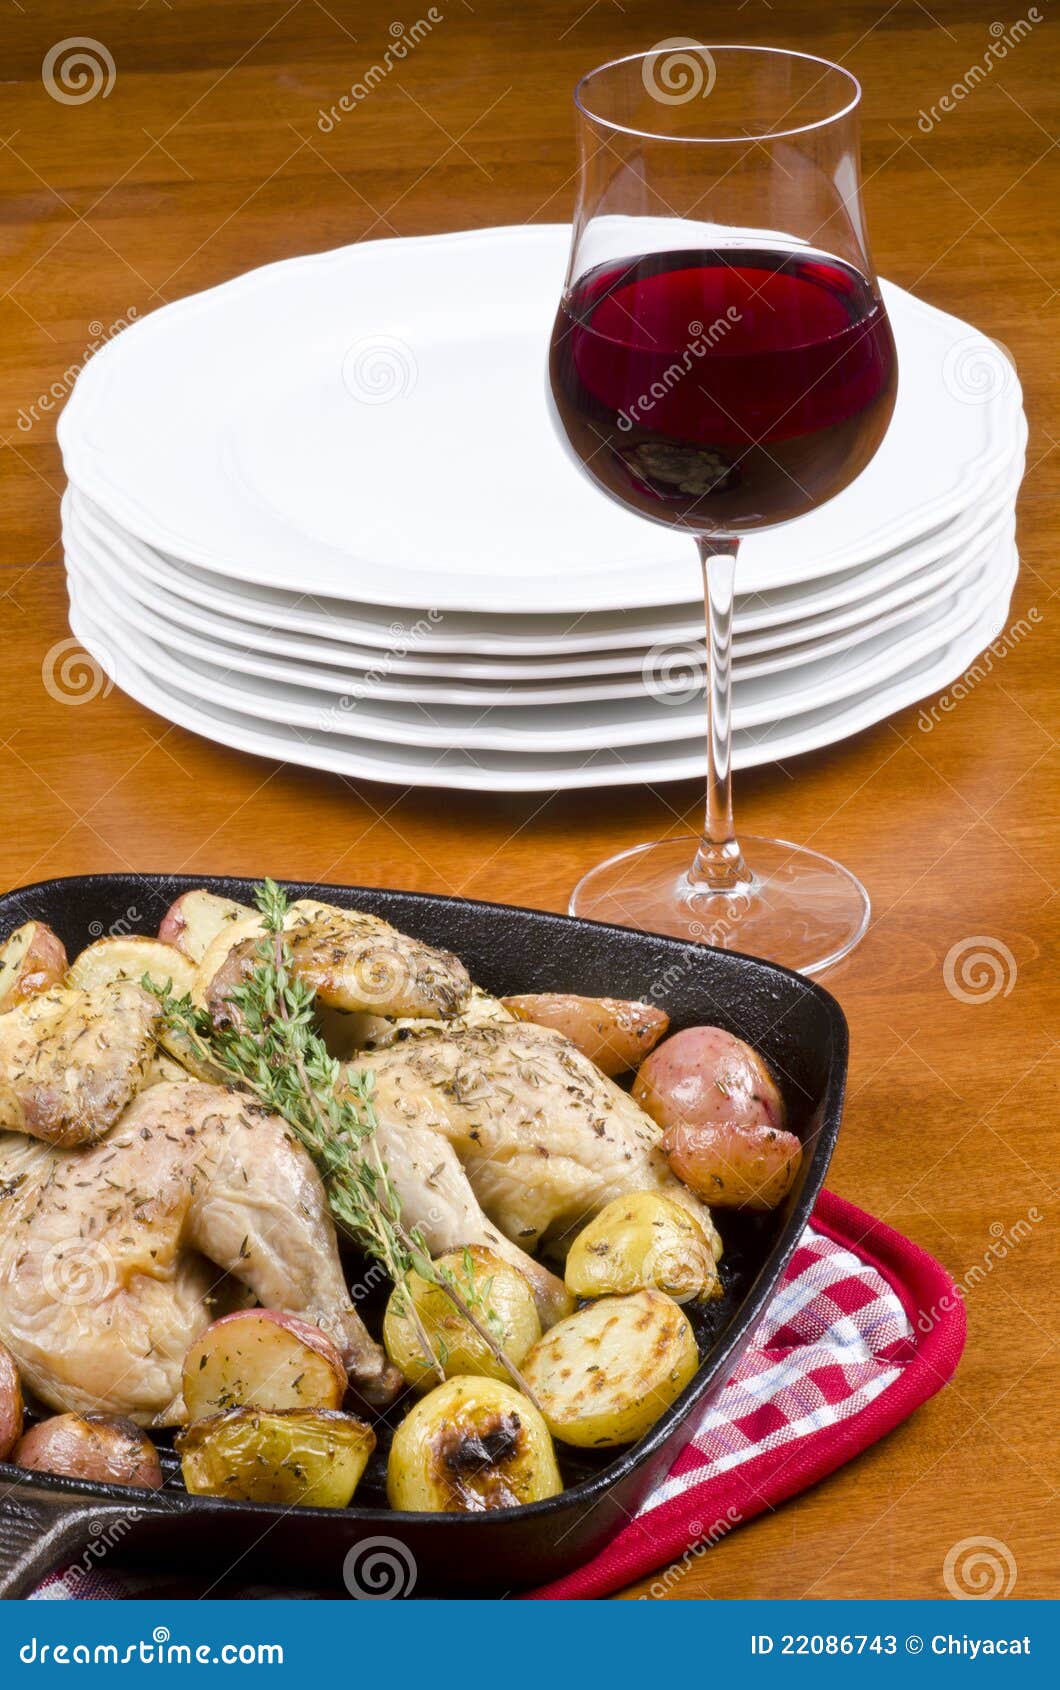 Roasted Cornish Game Hen Served with Red Wine Stock Image - Image of ...